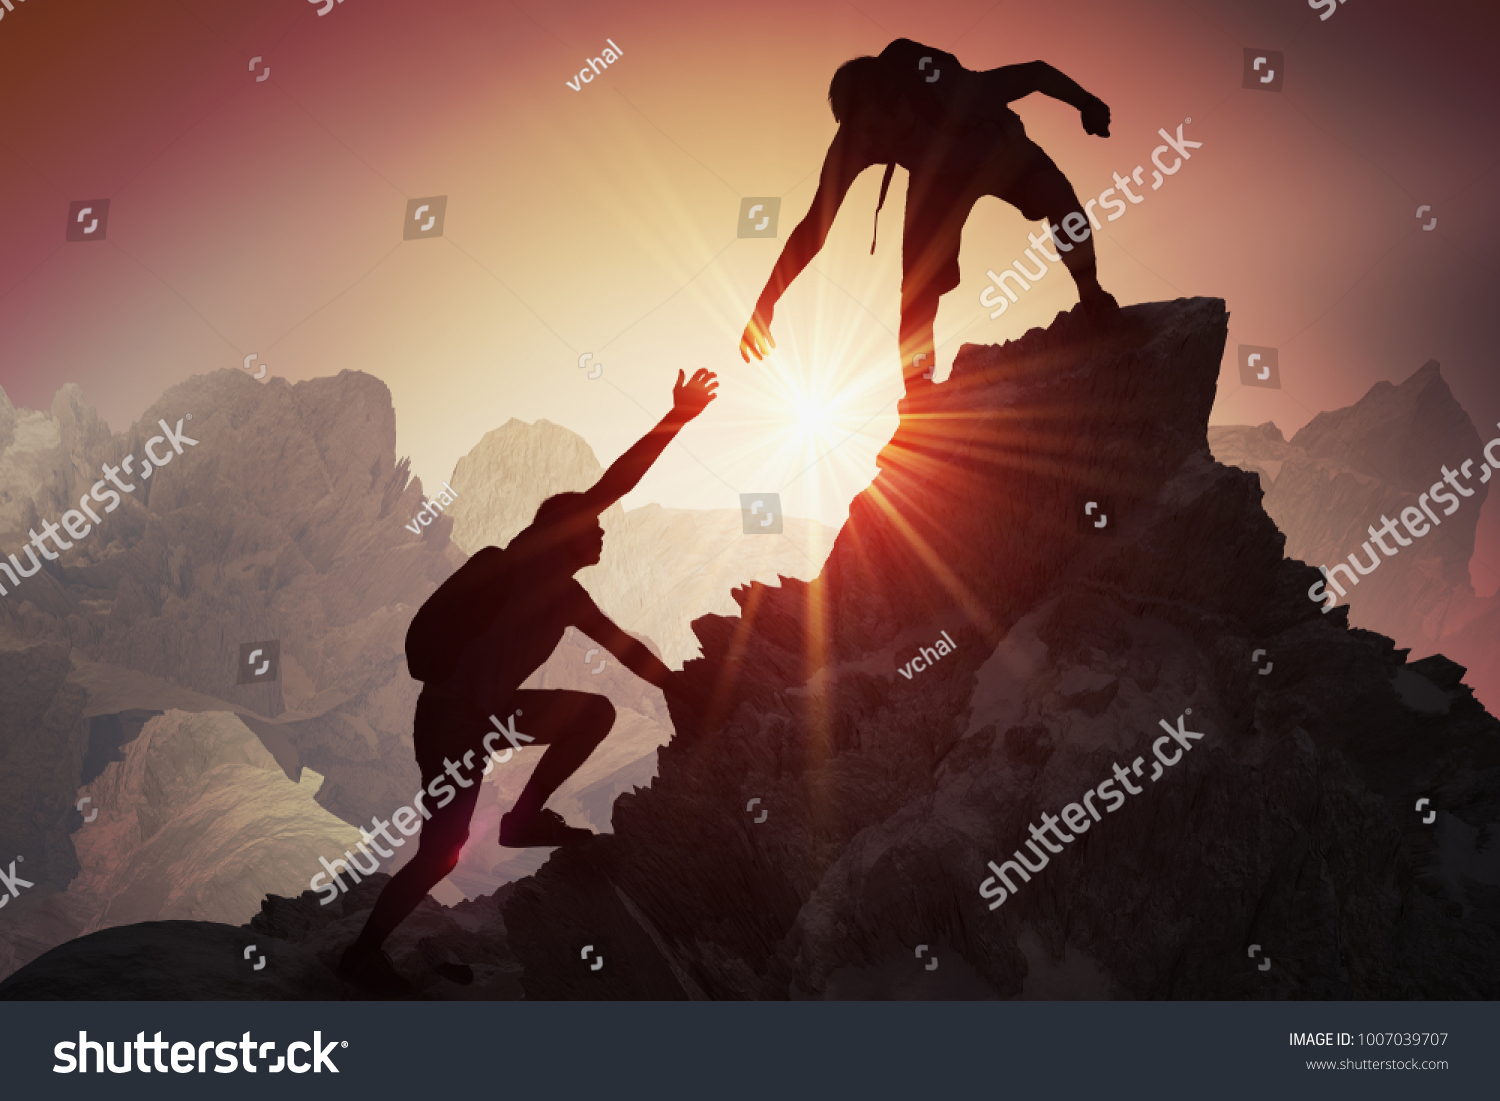 Help and assistance concept. Silhouettes of two people climbing on mountain and helping. #1007039707